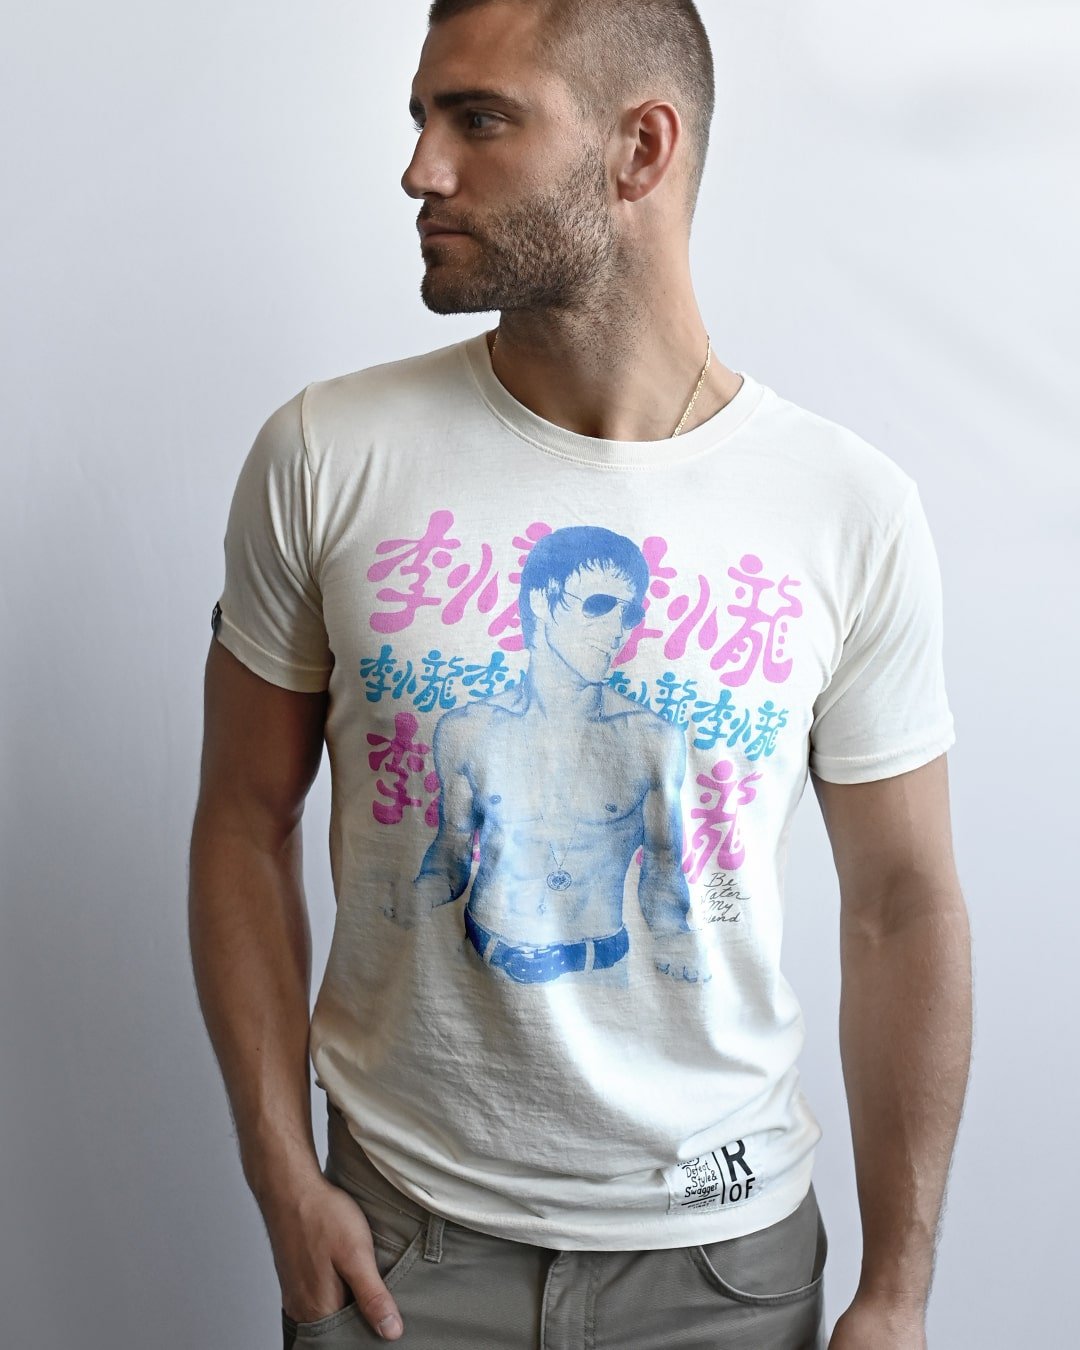 Bruce Lee Photo Vintage White Tee - Roots of Fight